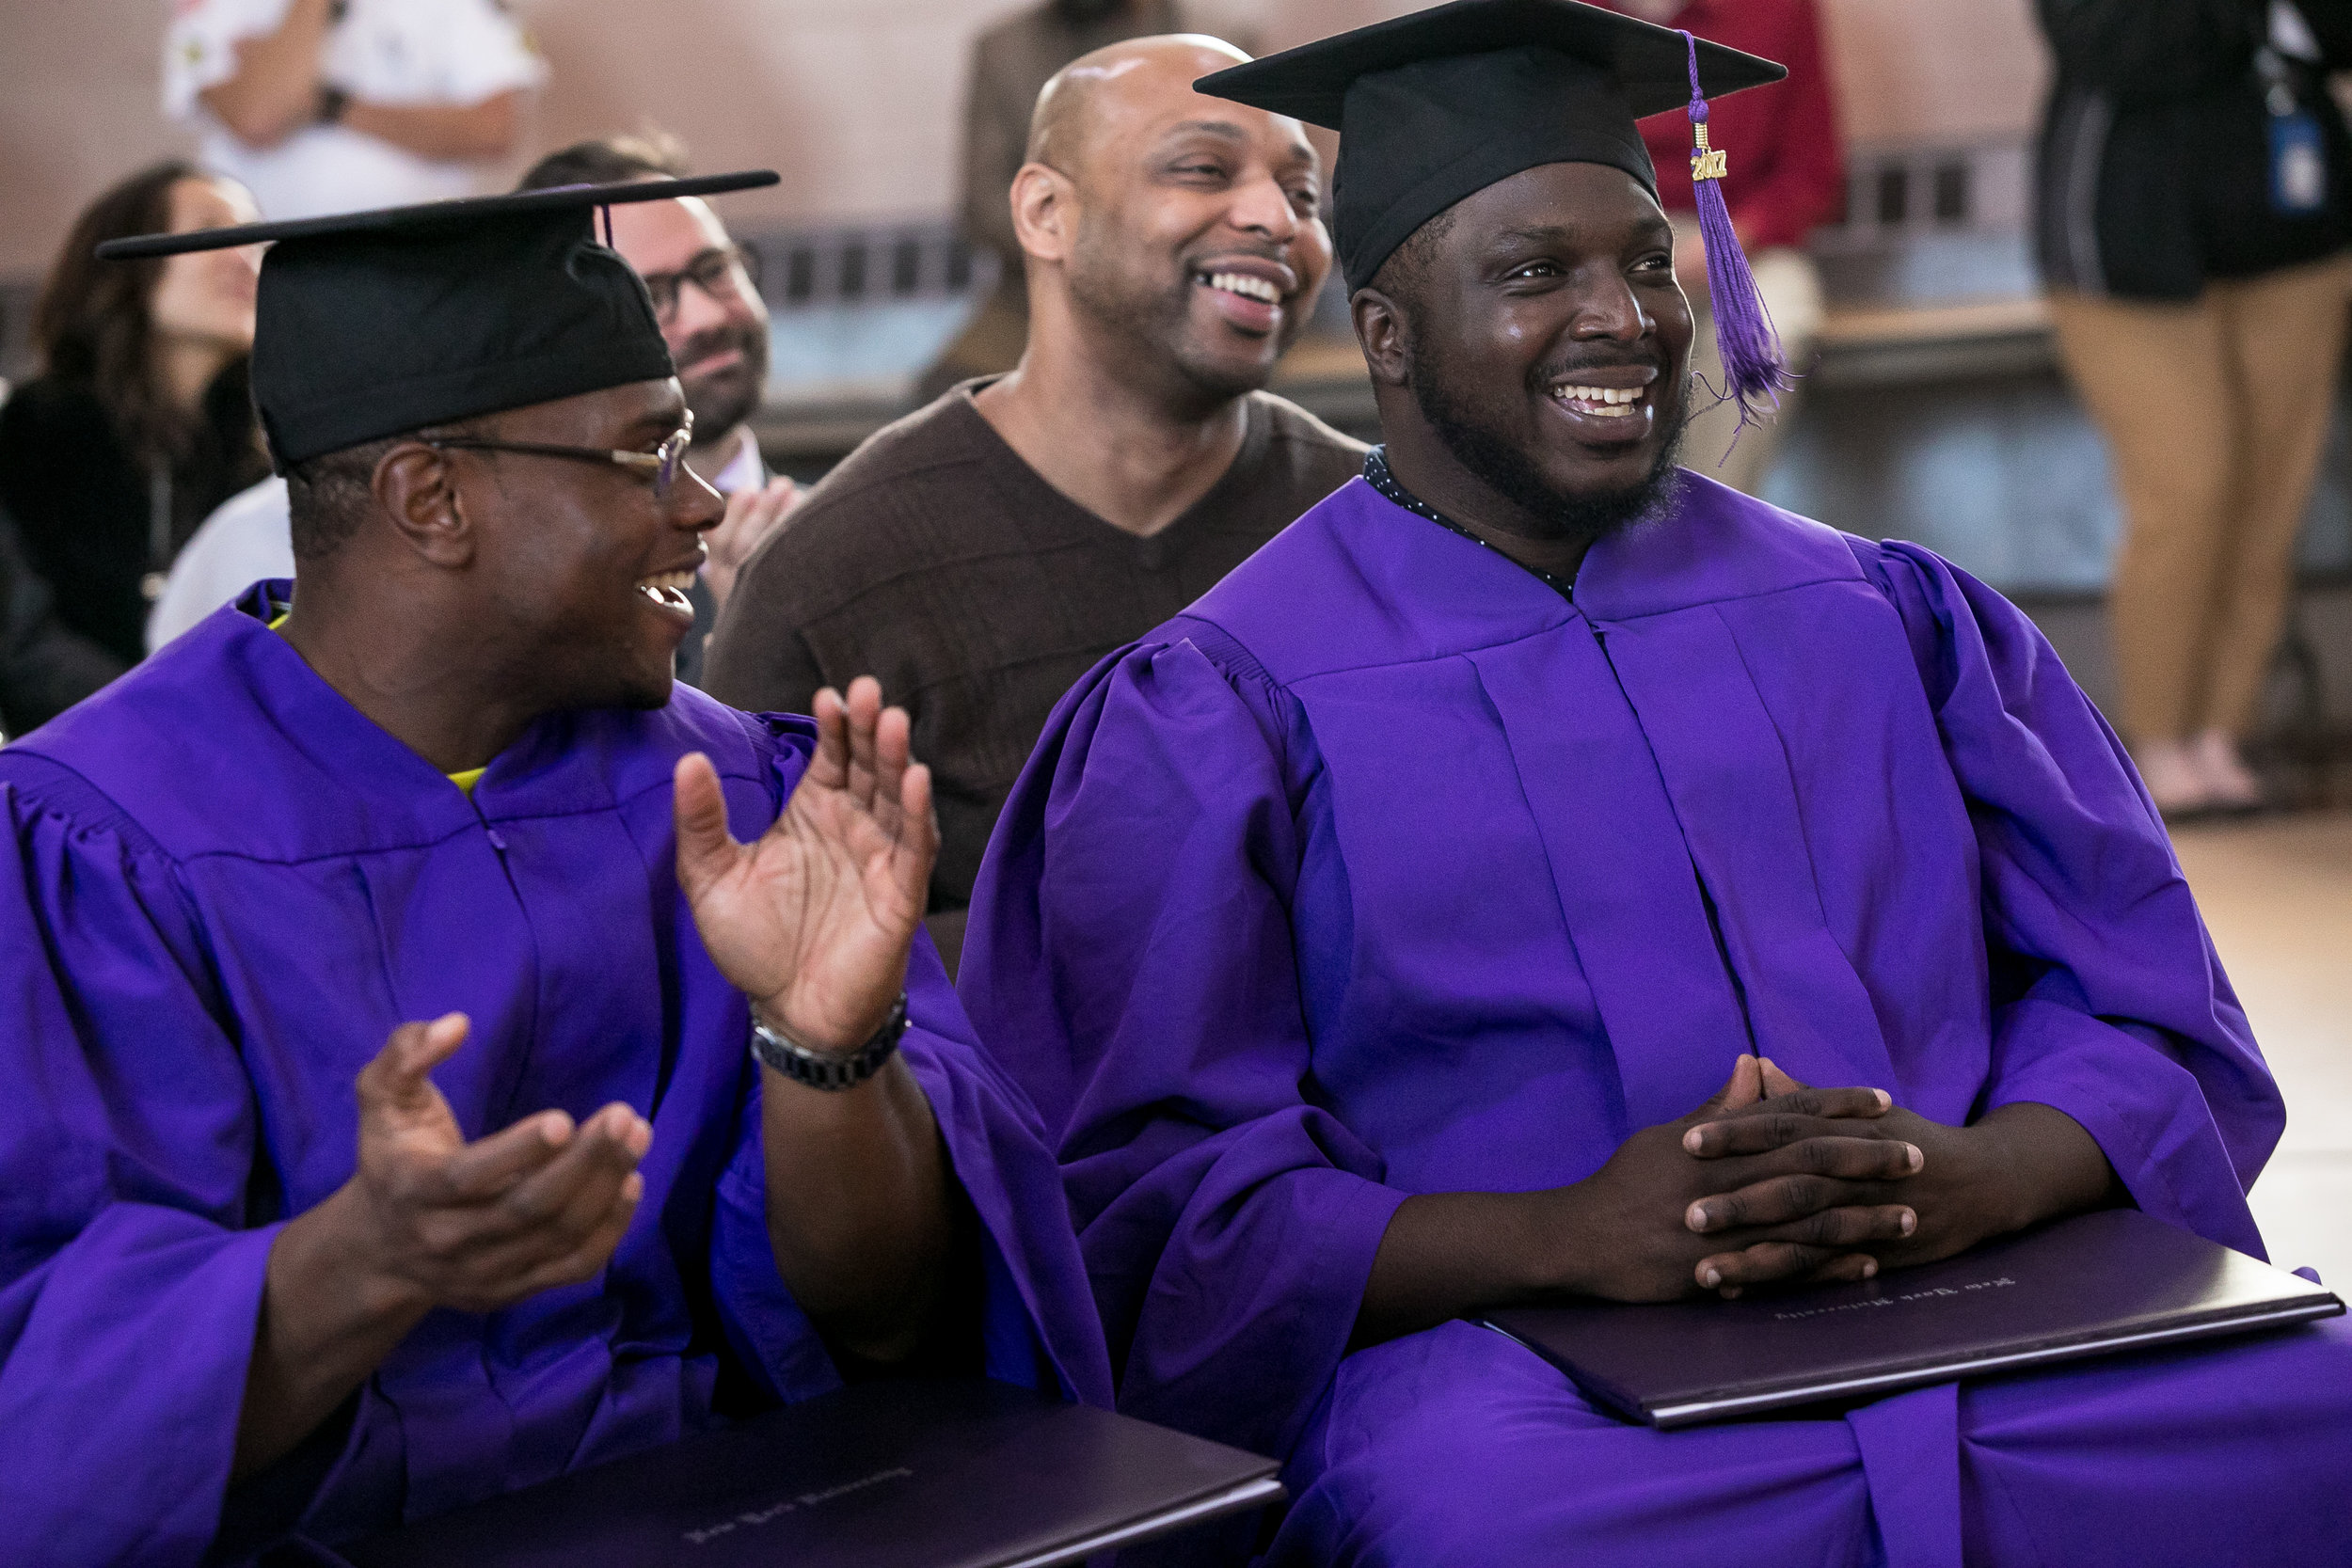  Ryan, right, also returned to Wallkill for graduation after his release.&nbsp;&nbsp;“We started in the program together, we’re going to graduate together, we wanted to go out right,” he said to a  Washington Square News  reporter. 